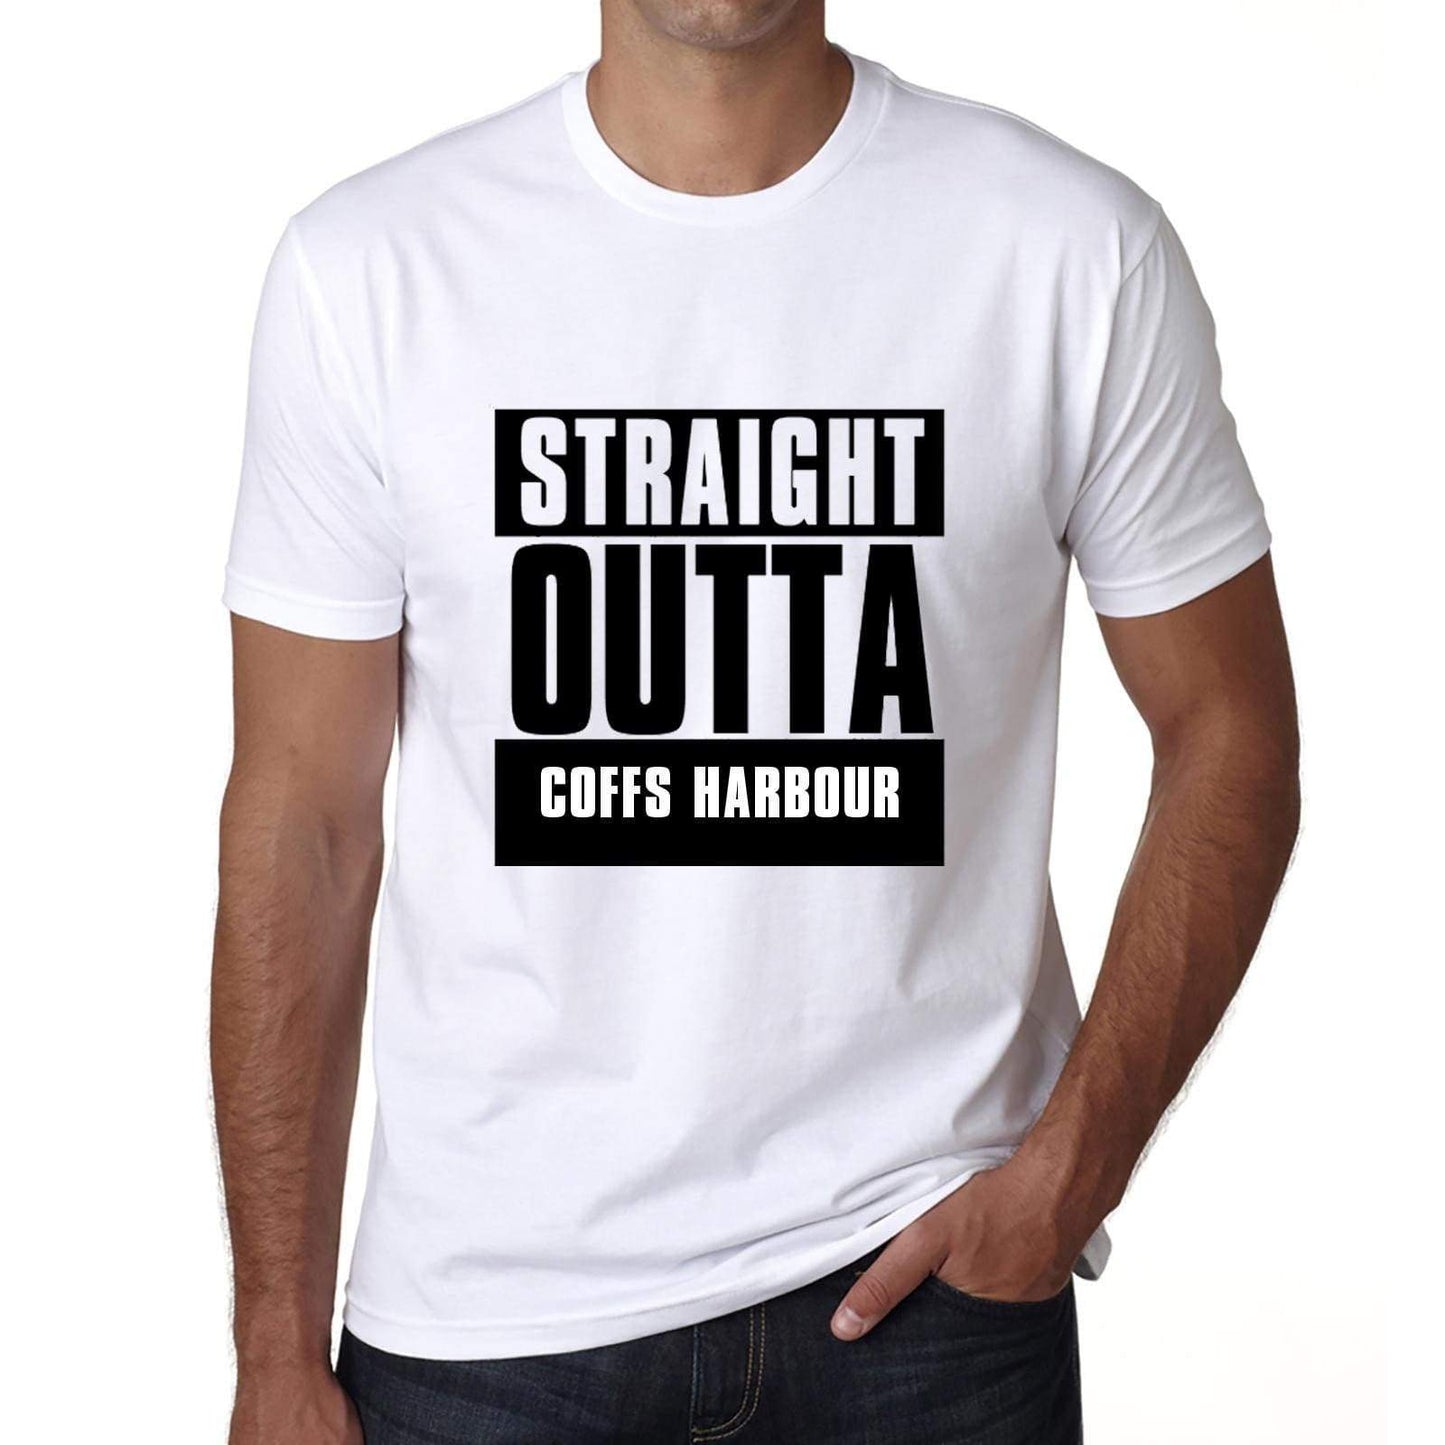 Straight Outta Coffs Harbour Mens Short Sleeve Round Neck T-Shirt 00027 - White / S - Casual